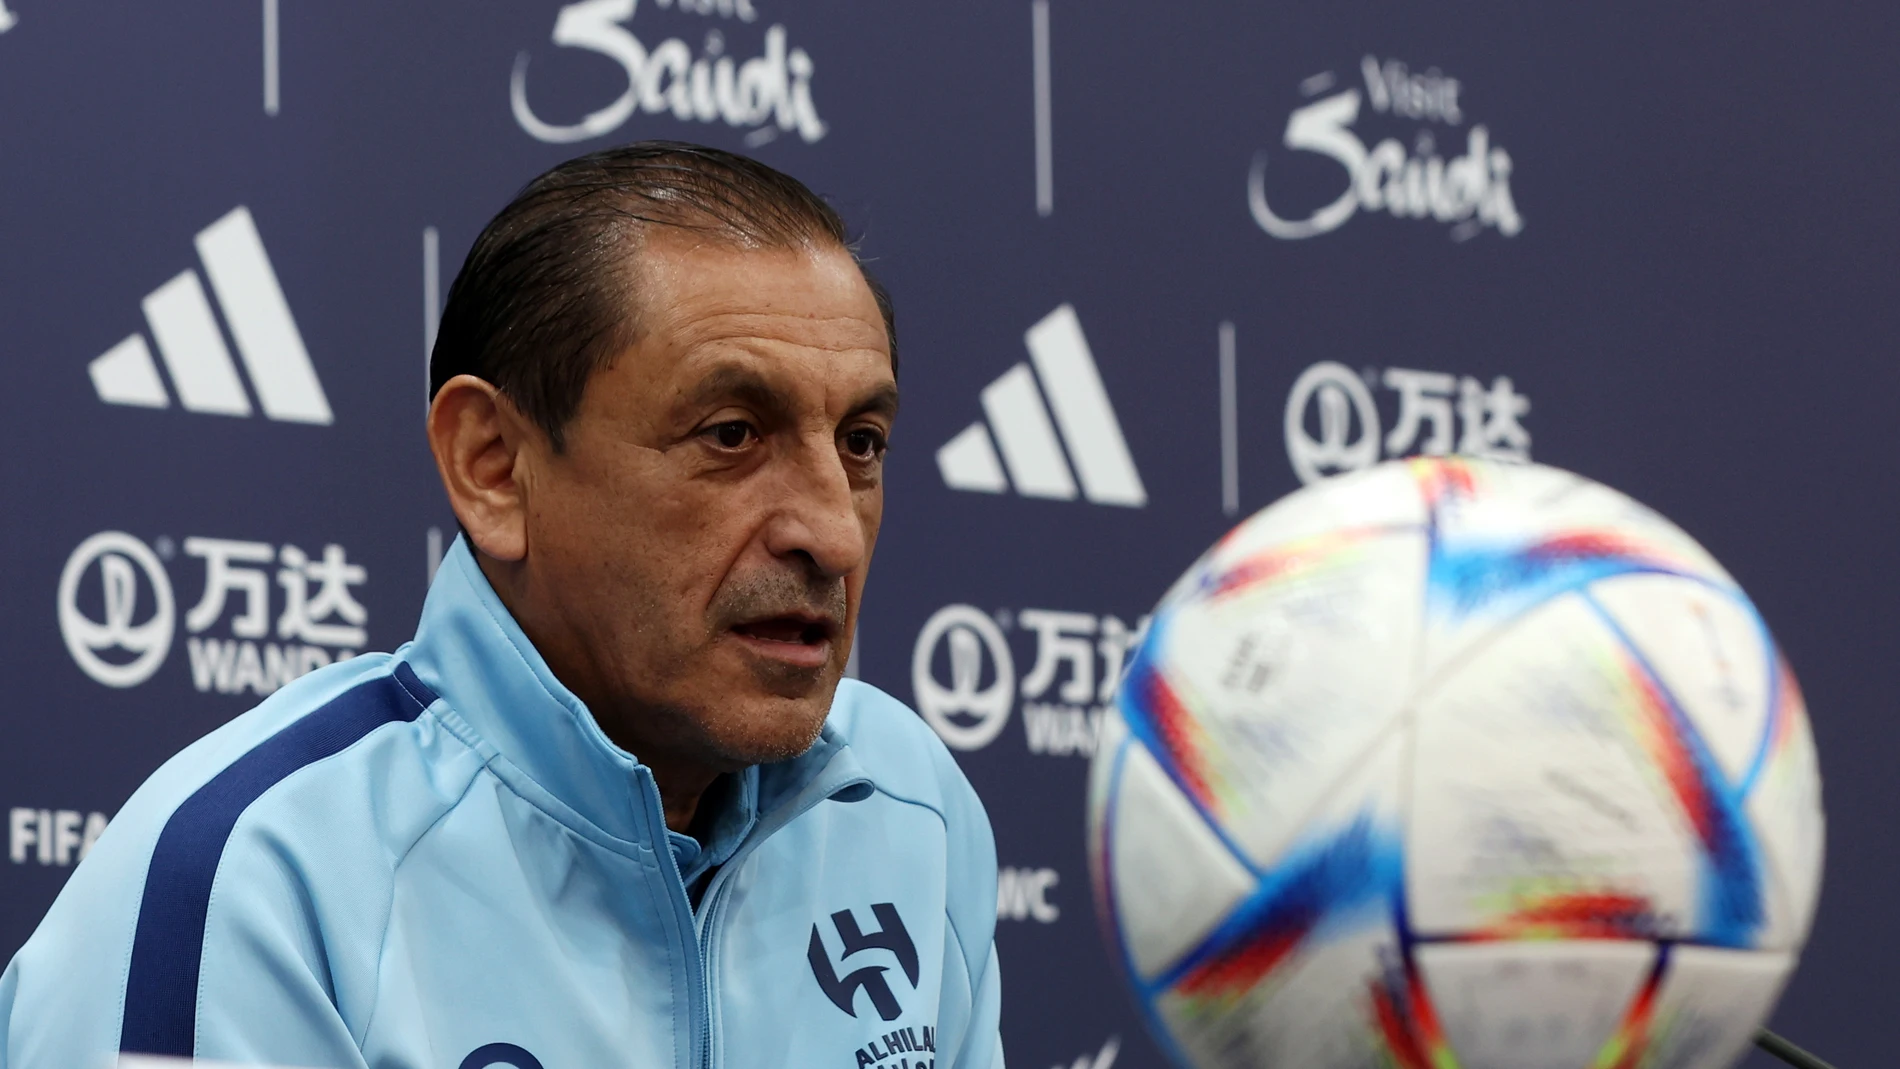 Tangier (Morocco), 06/02/2023.- Al Hilal SFC Argentine coach Ramon Diaz speaks during a press conference at the Ibn Batouta Stadium Stadium in Tangier, Morocco, 06 February 2023. Al Hilal SFC will face CR Flamengo in a FIFA Club World Cup semifinal match on 07 February 2023. (Mundial de Fútbol, Marruecos, Tánger) EFE/EPA/MOHAMED MESSARA